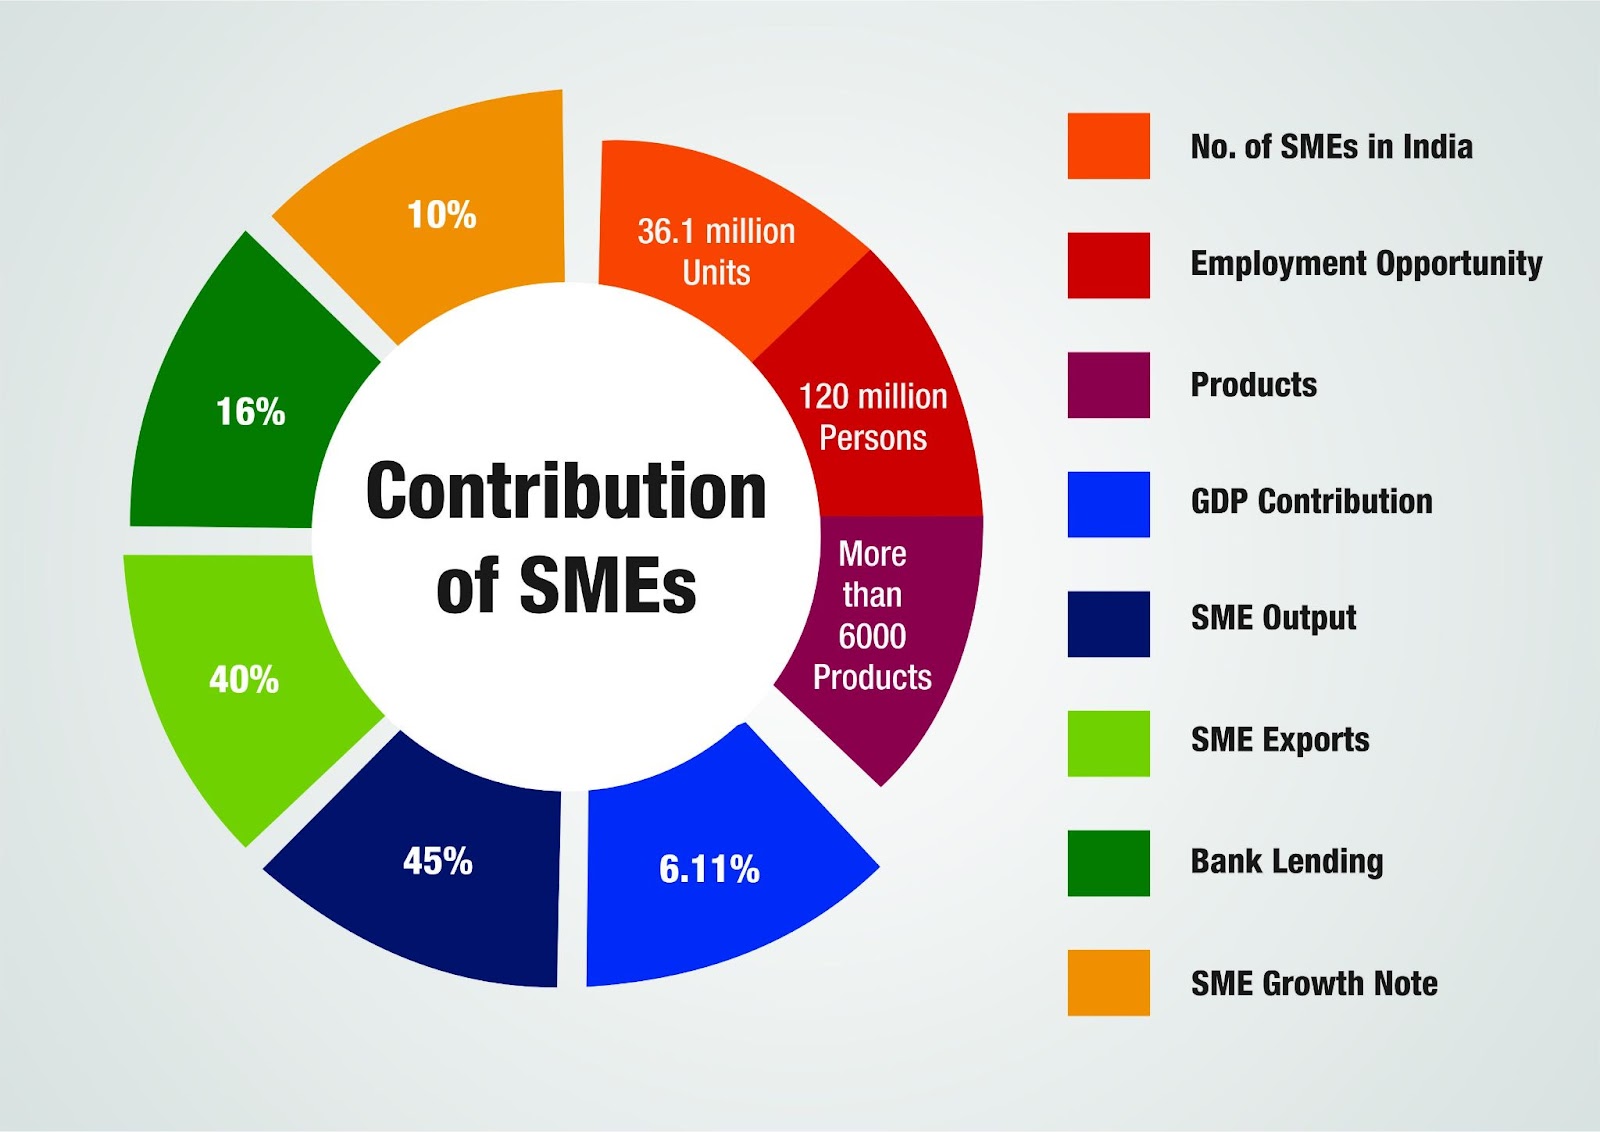 A pie diagram showing the different contributions of SMEs 
No of SMEs- 36.1 million units (orange )
Employment opportunity (red)
Products - More than 6000 products ( purple)
GDP contribution- 6.11 % (light blue )
SME output - 45% (dark blue)
SME exports - 40 % (light green ) 
Bank Lending - 16% ( dark green )
SME growth rate - 10% (mustard yellow )
